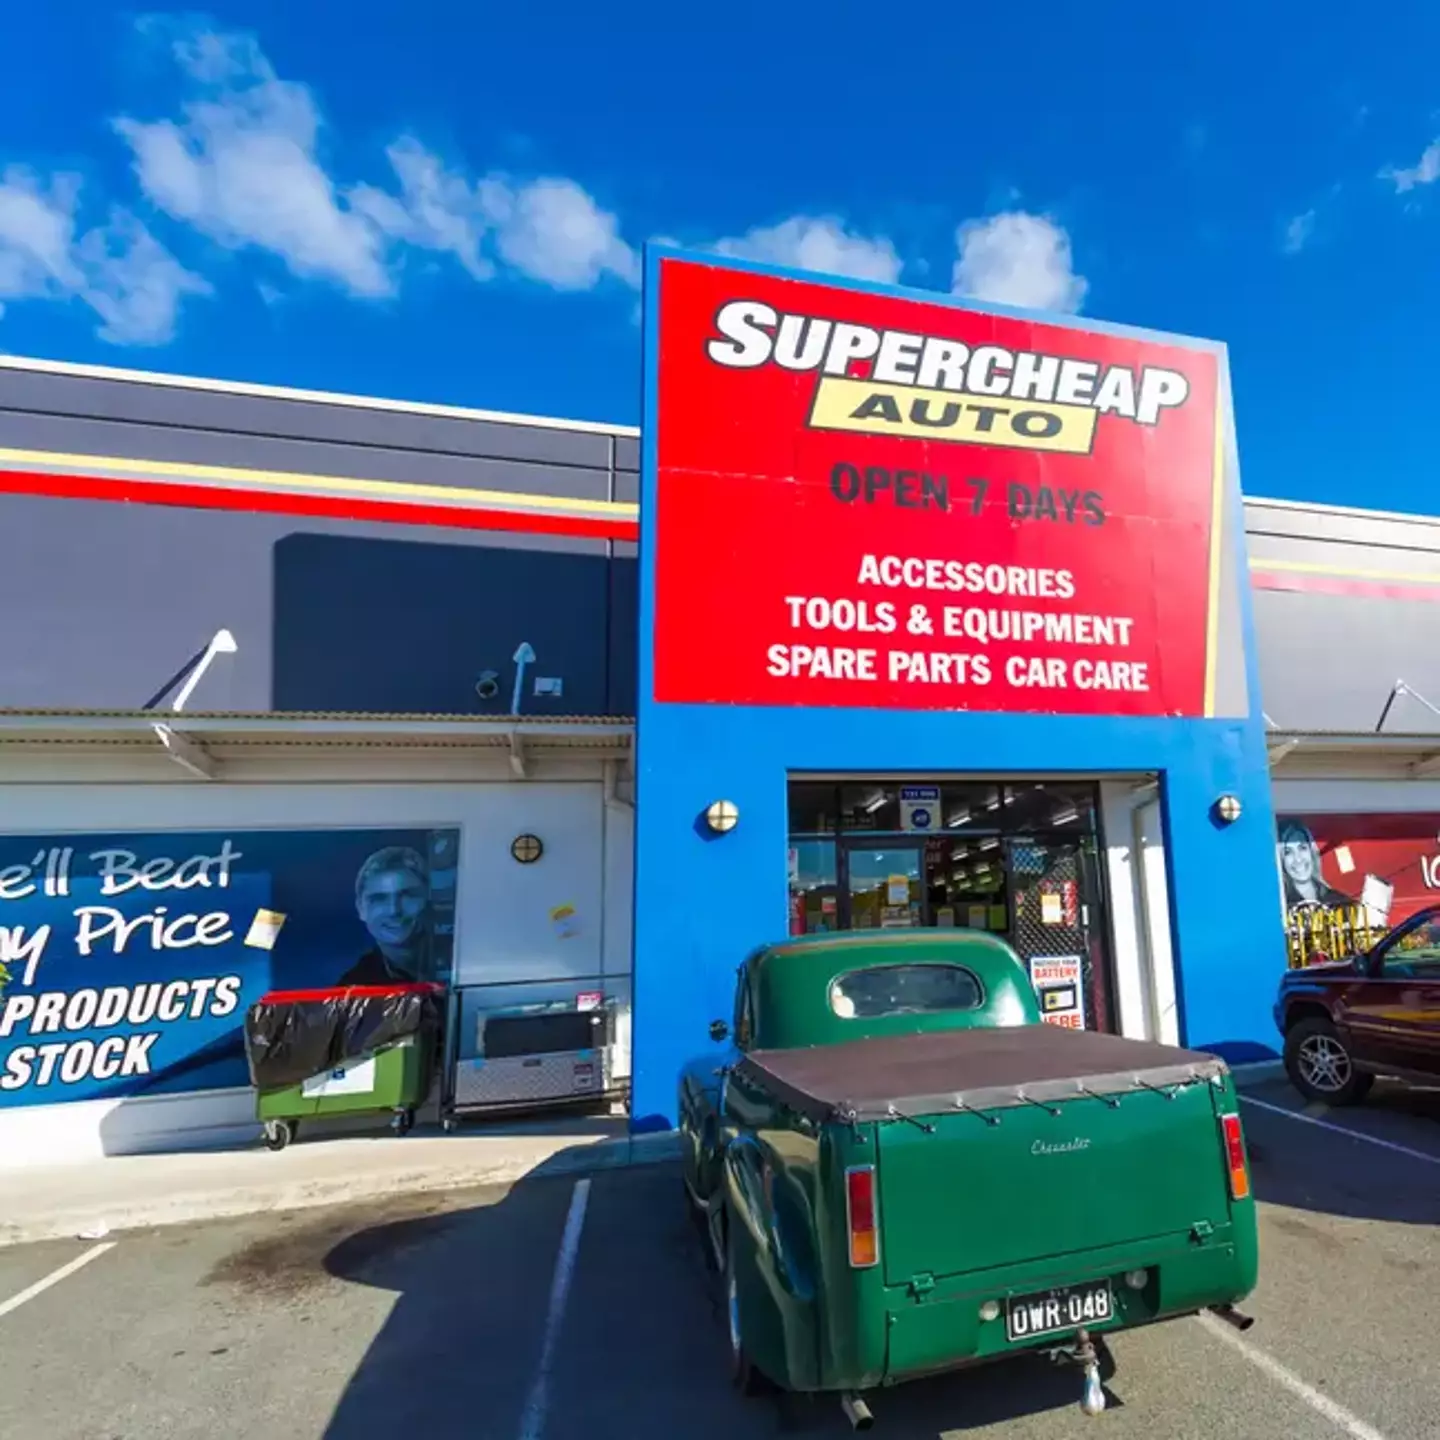 The alleged shoplifting took place at the Ashmore branch of Supercheap Auto.